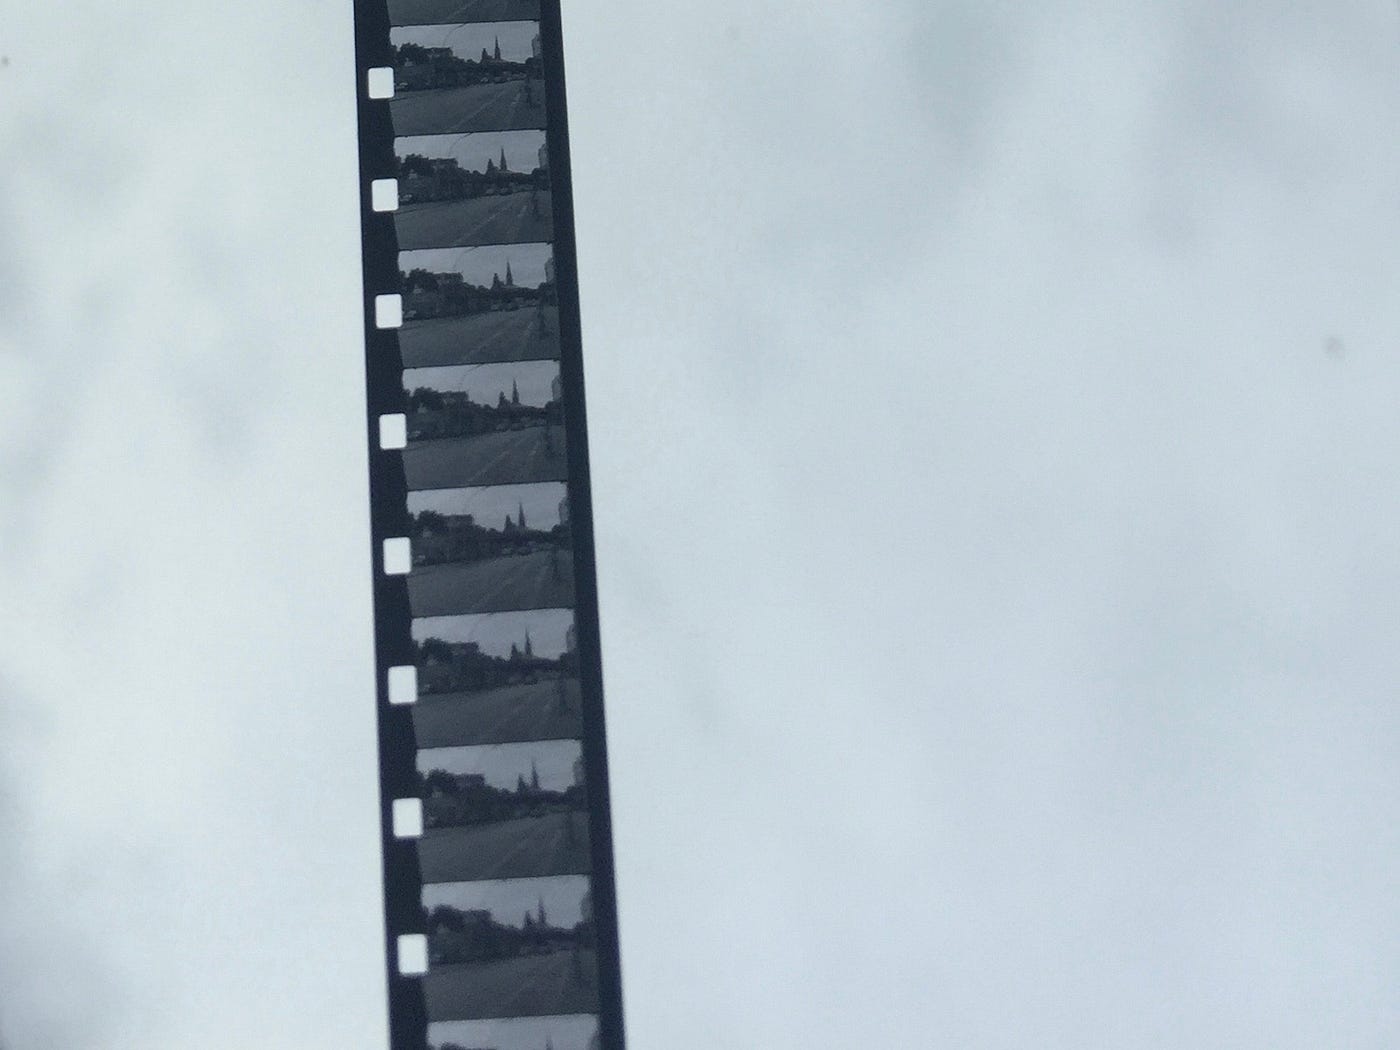 8mm / Super 8 / 16mm - Scanning Resolution - Research - Kinograph Forums